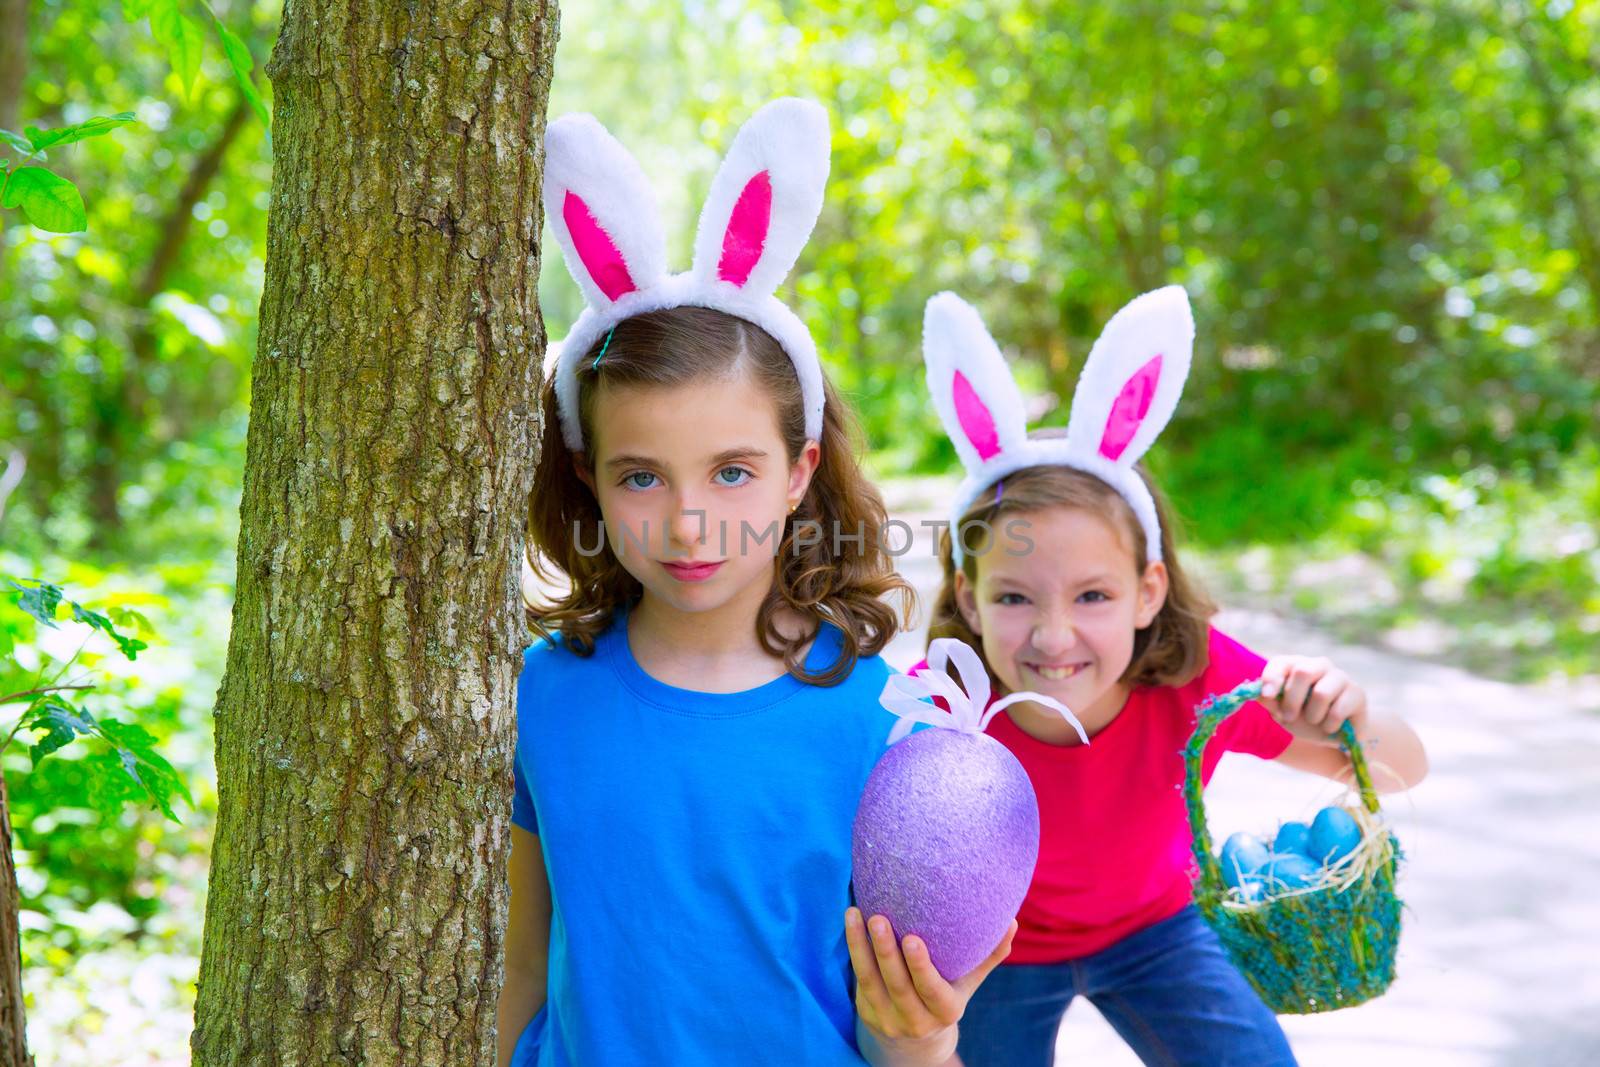 Easter girls playing on forest with bunny teeth expression outdoor